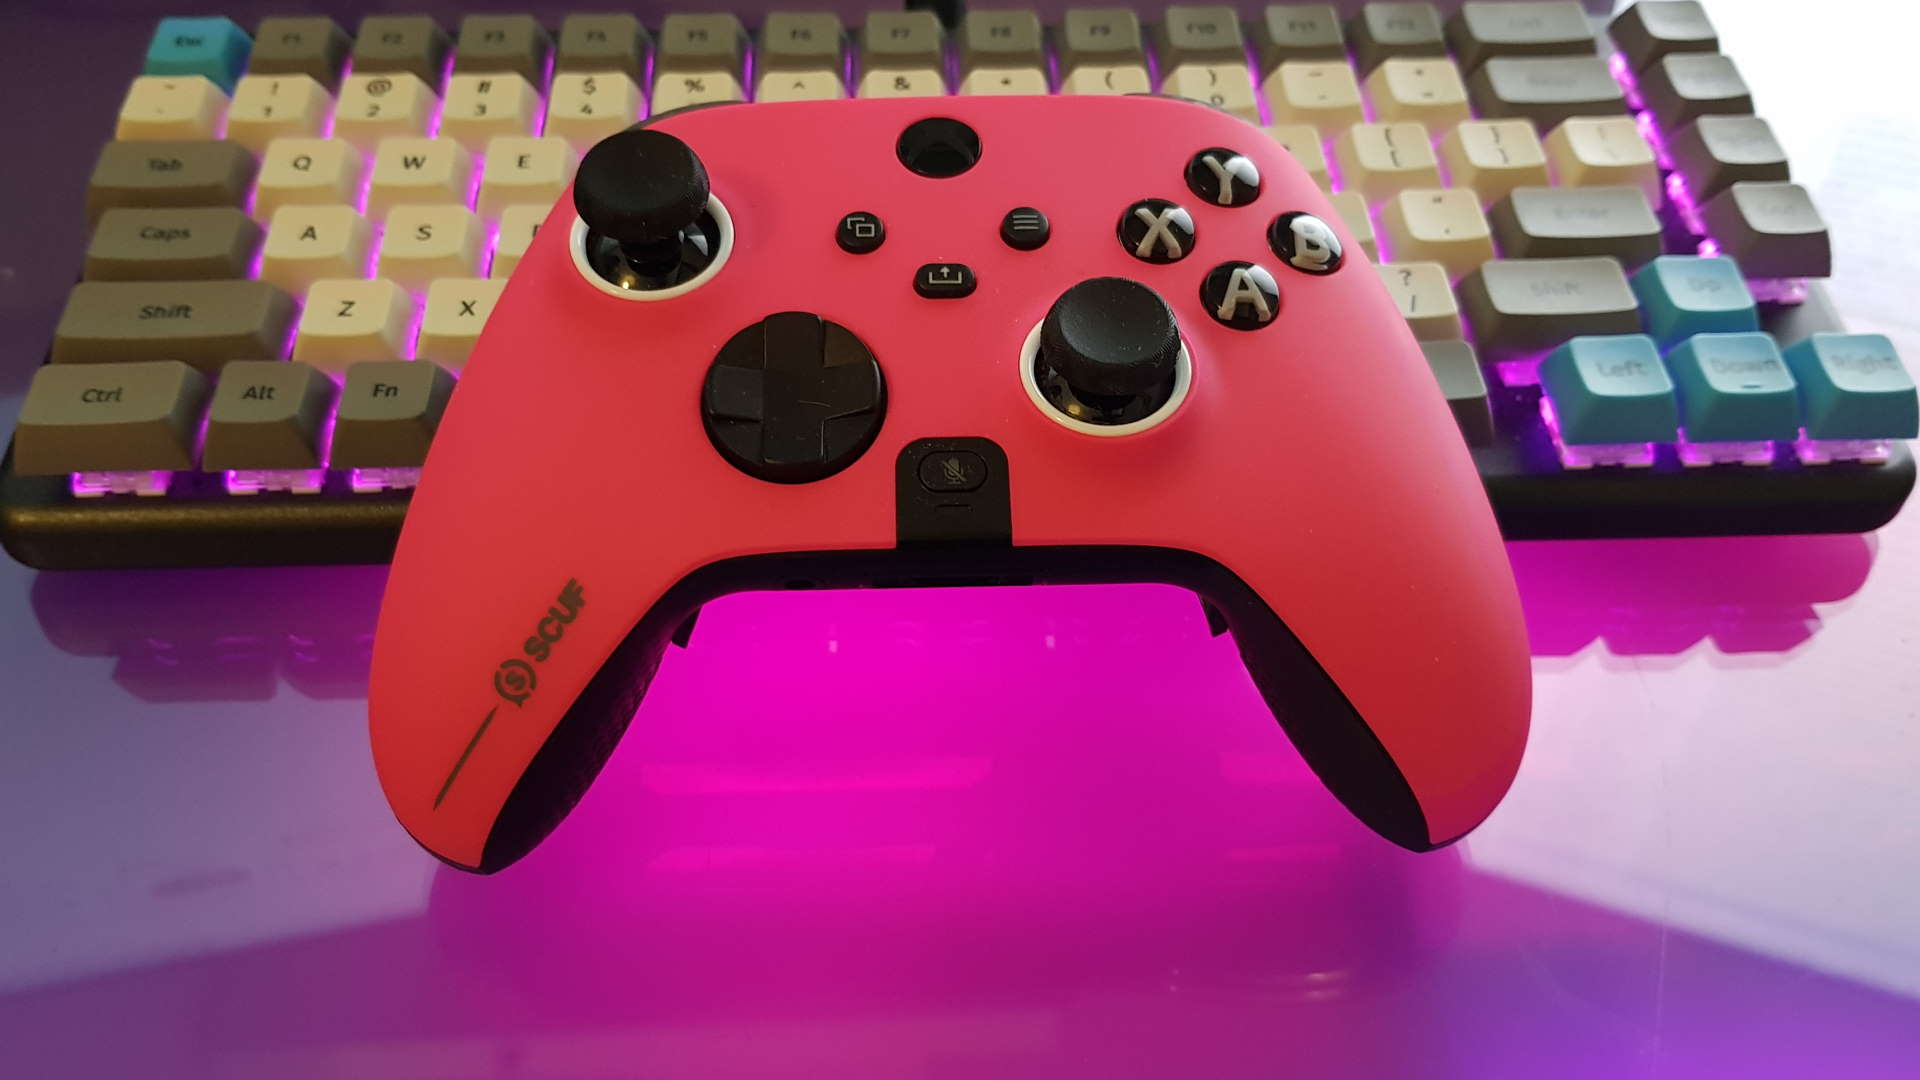 Scuf Instinct Pro controller in front of a System 76 Launch keyboard